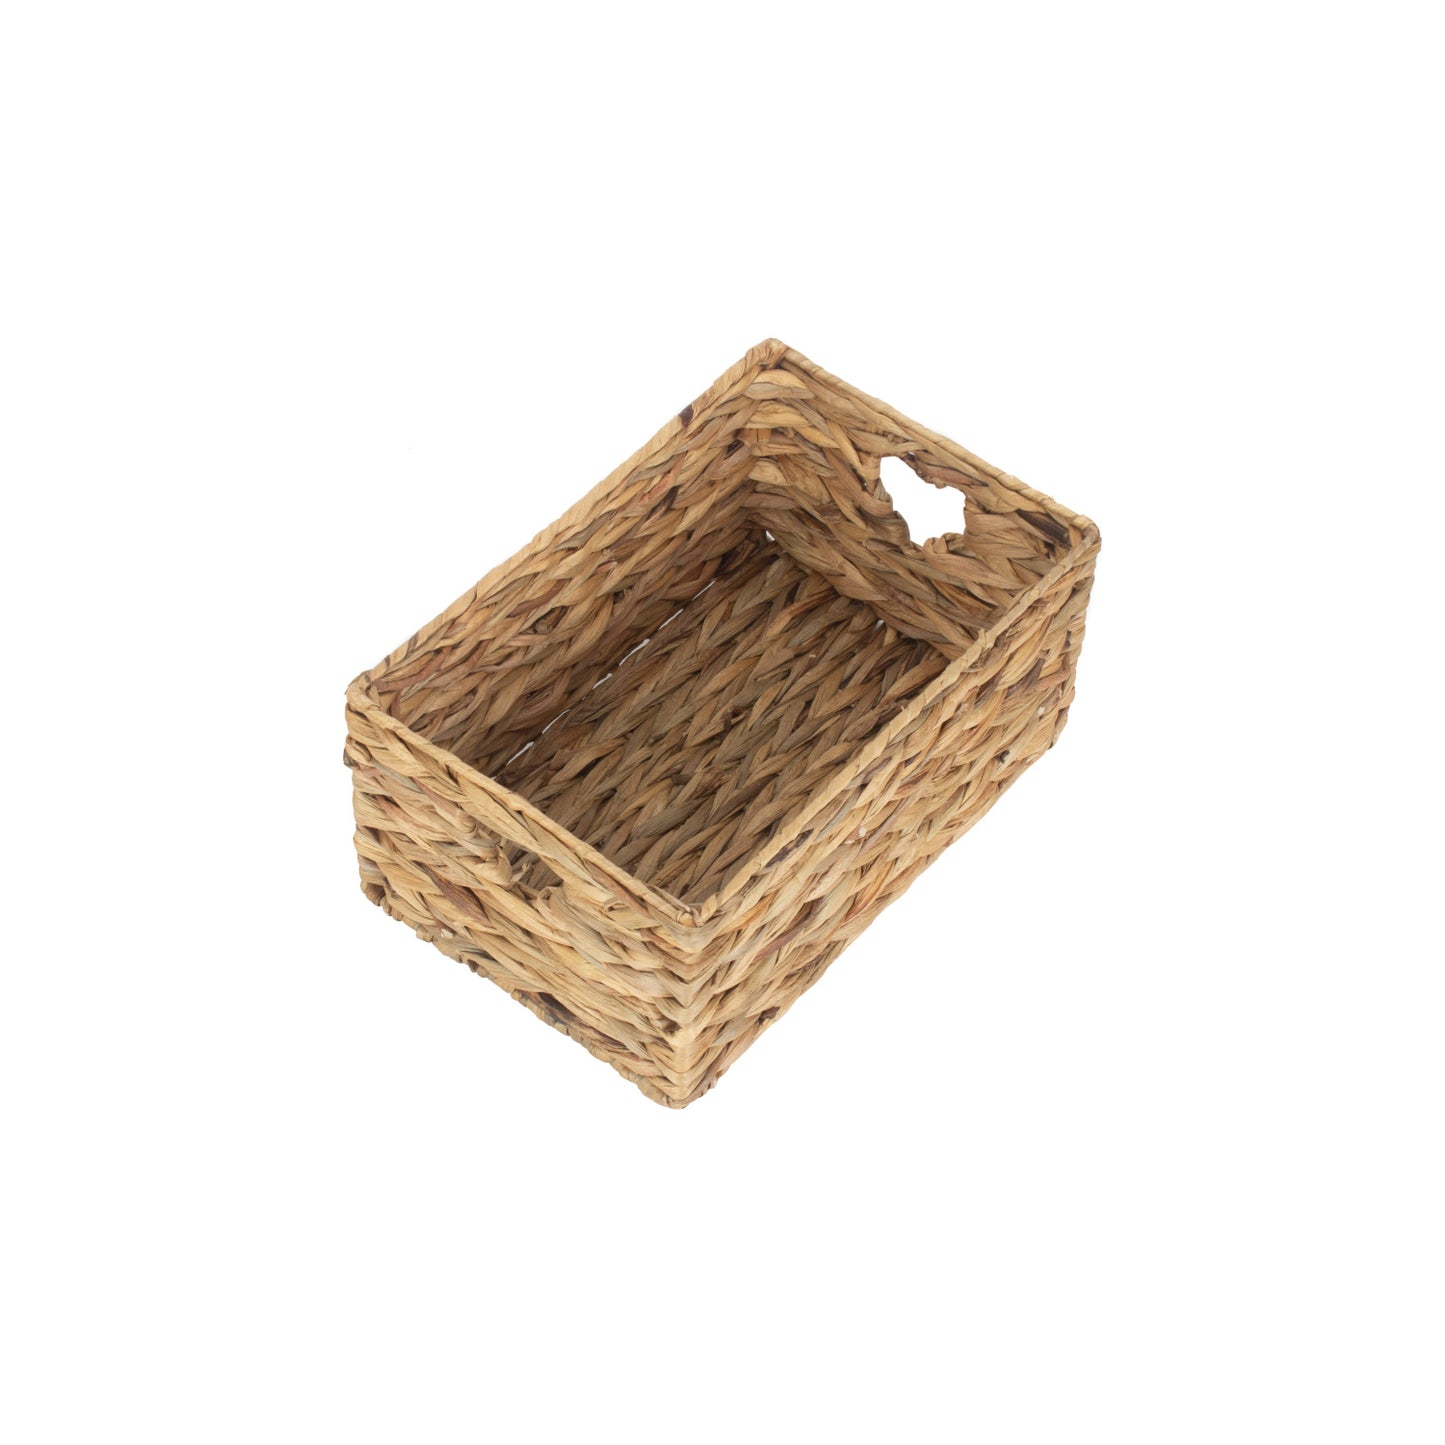 Small Water Hyacinth Storage Basket Size 1 With Heart Cut-out